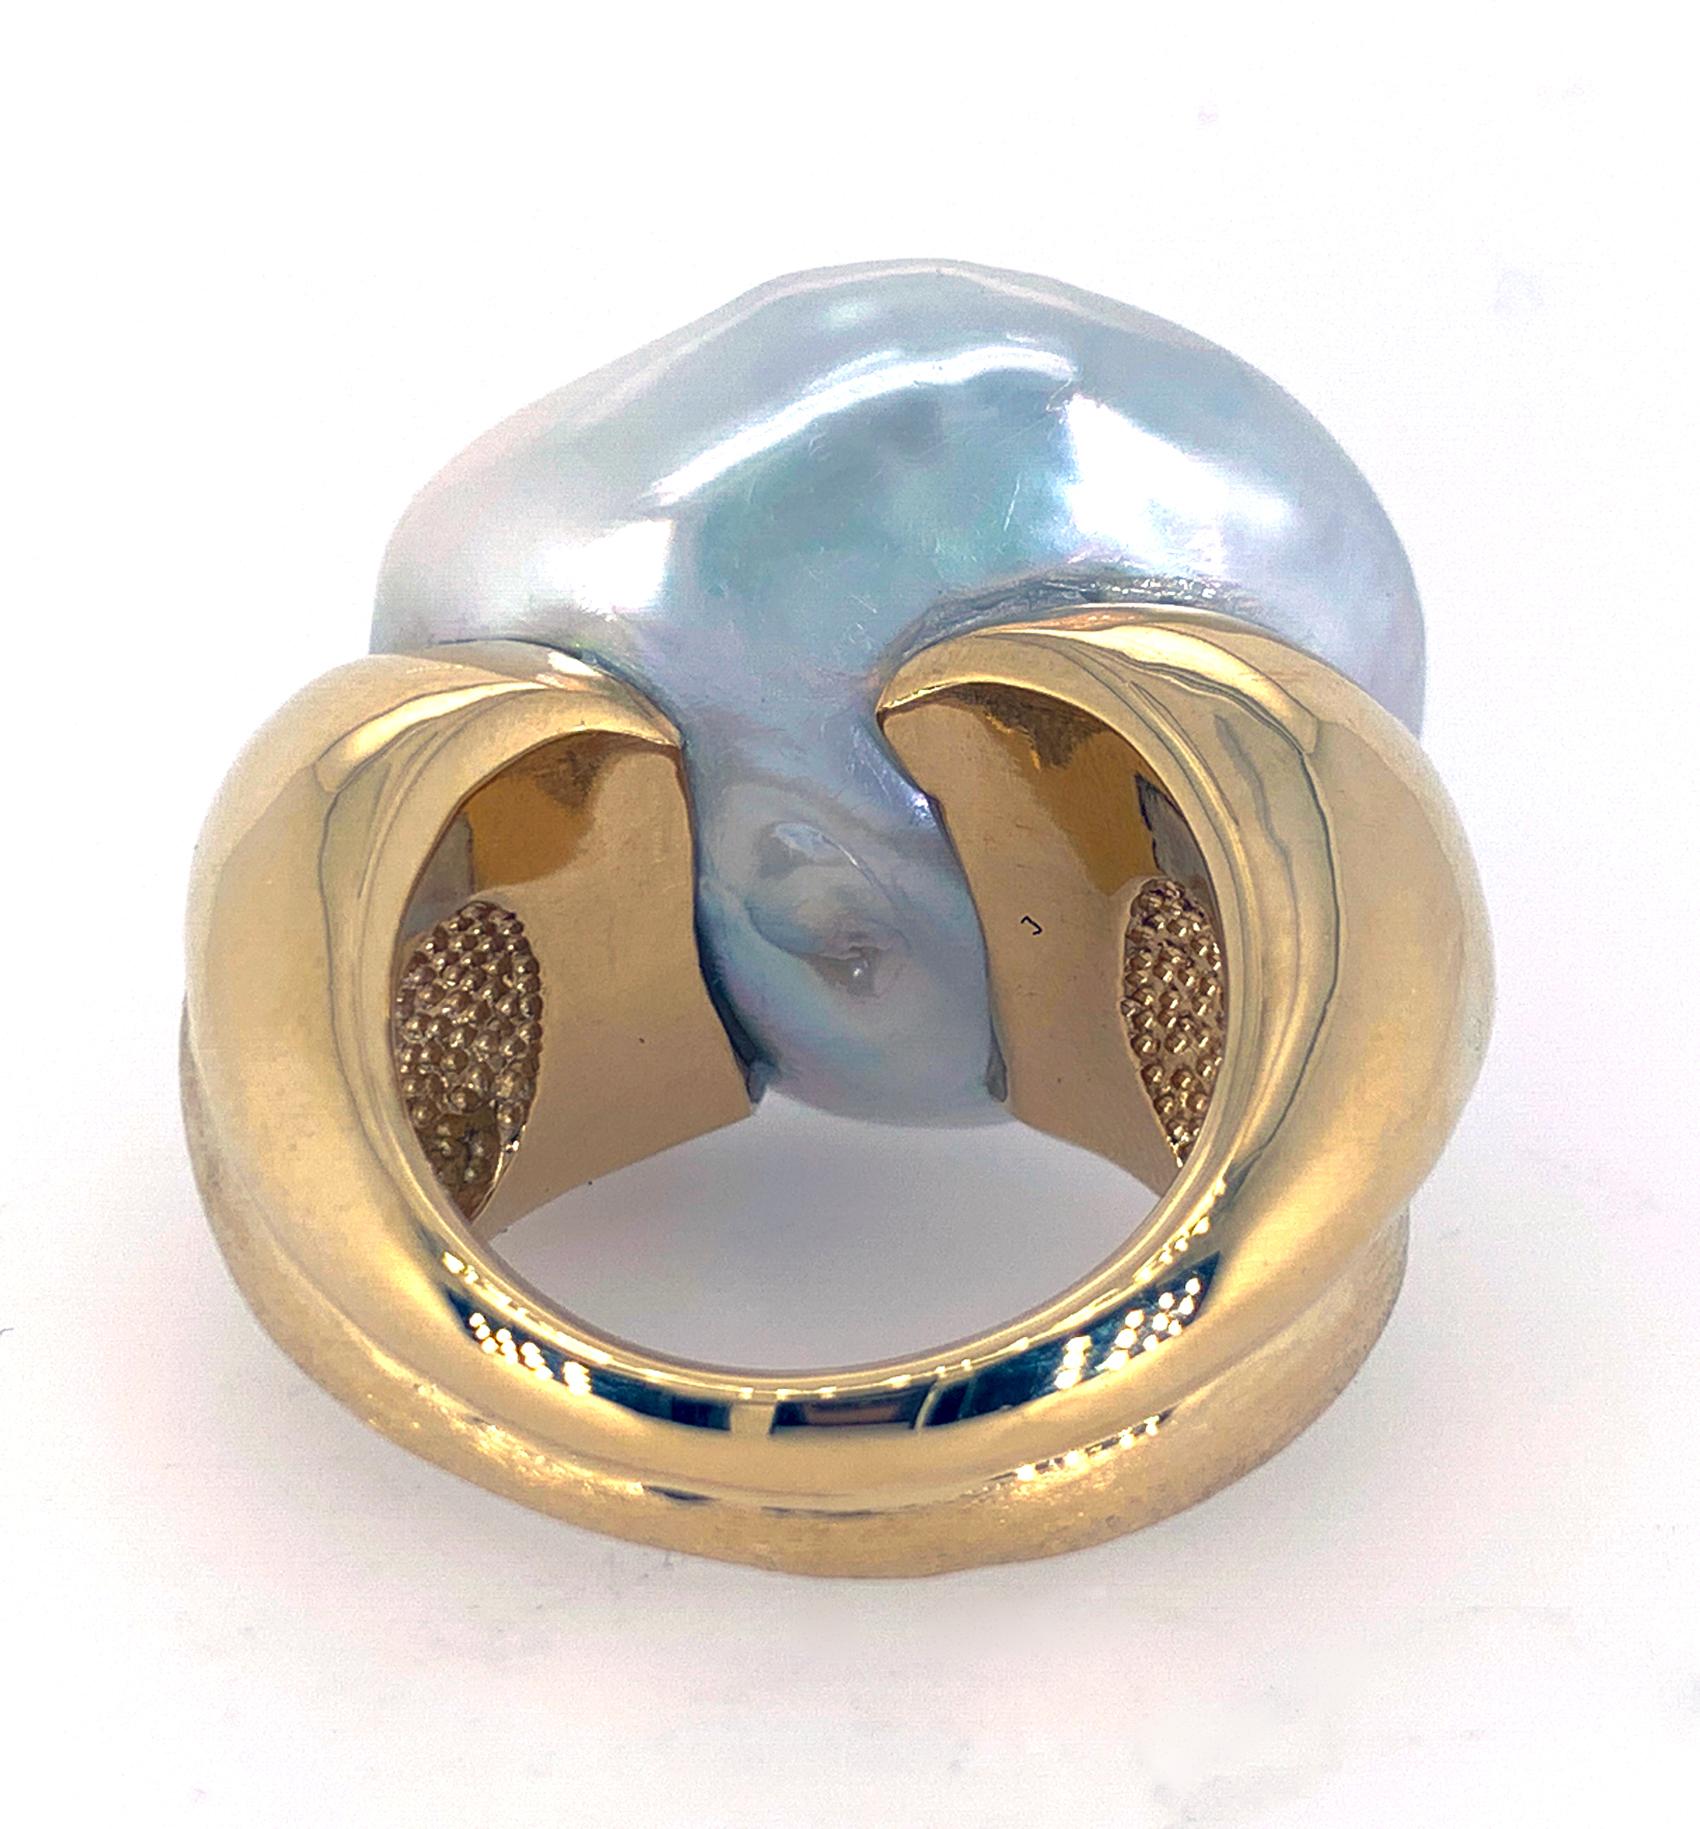 Yvel's signature, handmade 18k yellow Gold, Satin-finish is combined with high polish gold in this large Pearl Ring.  Large Baroque Pearl is approximately 27mm x 29mm.
Size 10 1/2
Stamped 750, and YVEL hallmark